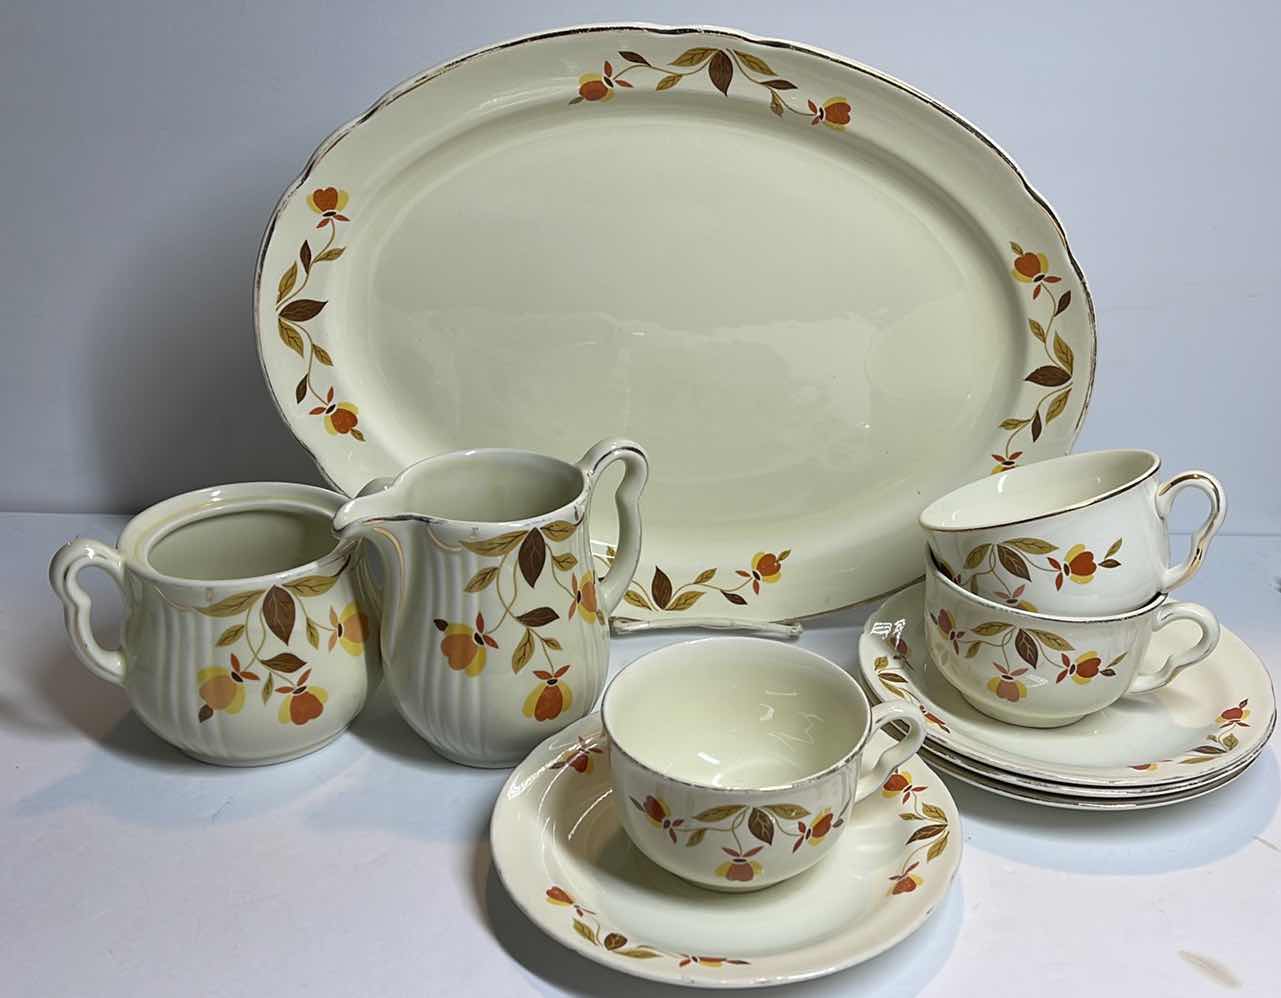 Photo 1 of SUPERIOR HALL QUALITY AUTUMN LEAF PATTERN -1 SERVING TRAY - 3 TEA CUPS - 4 SAUCERS -